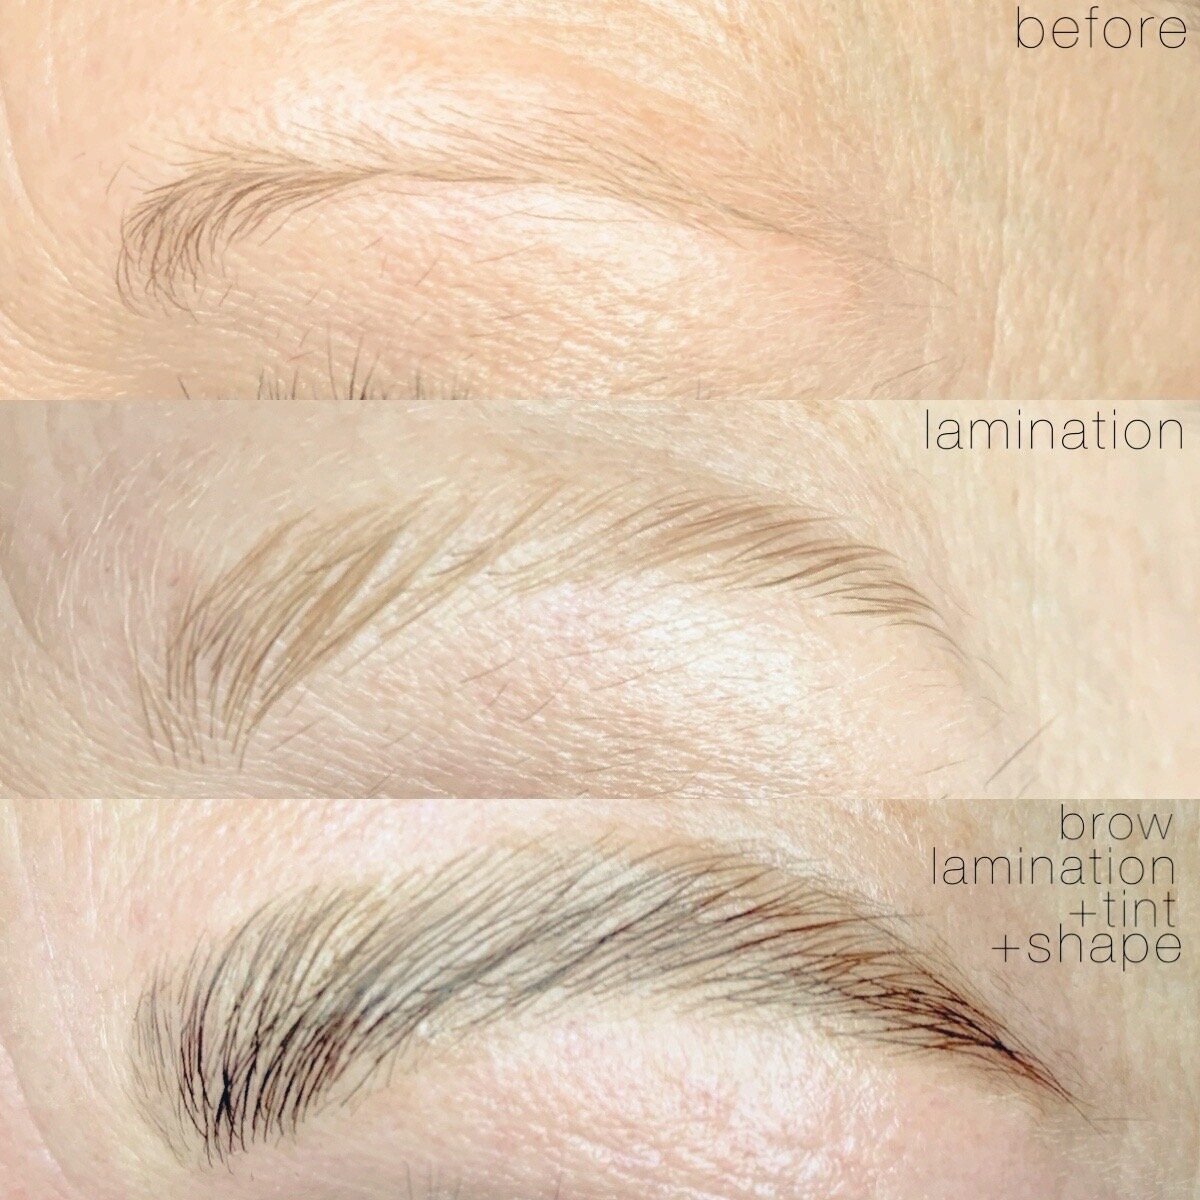 brow lamination before after sal